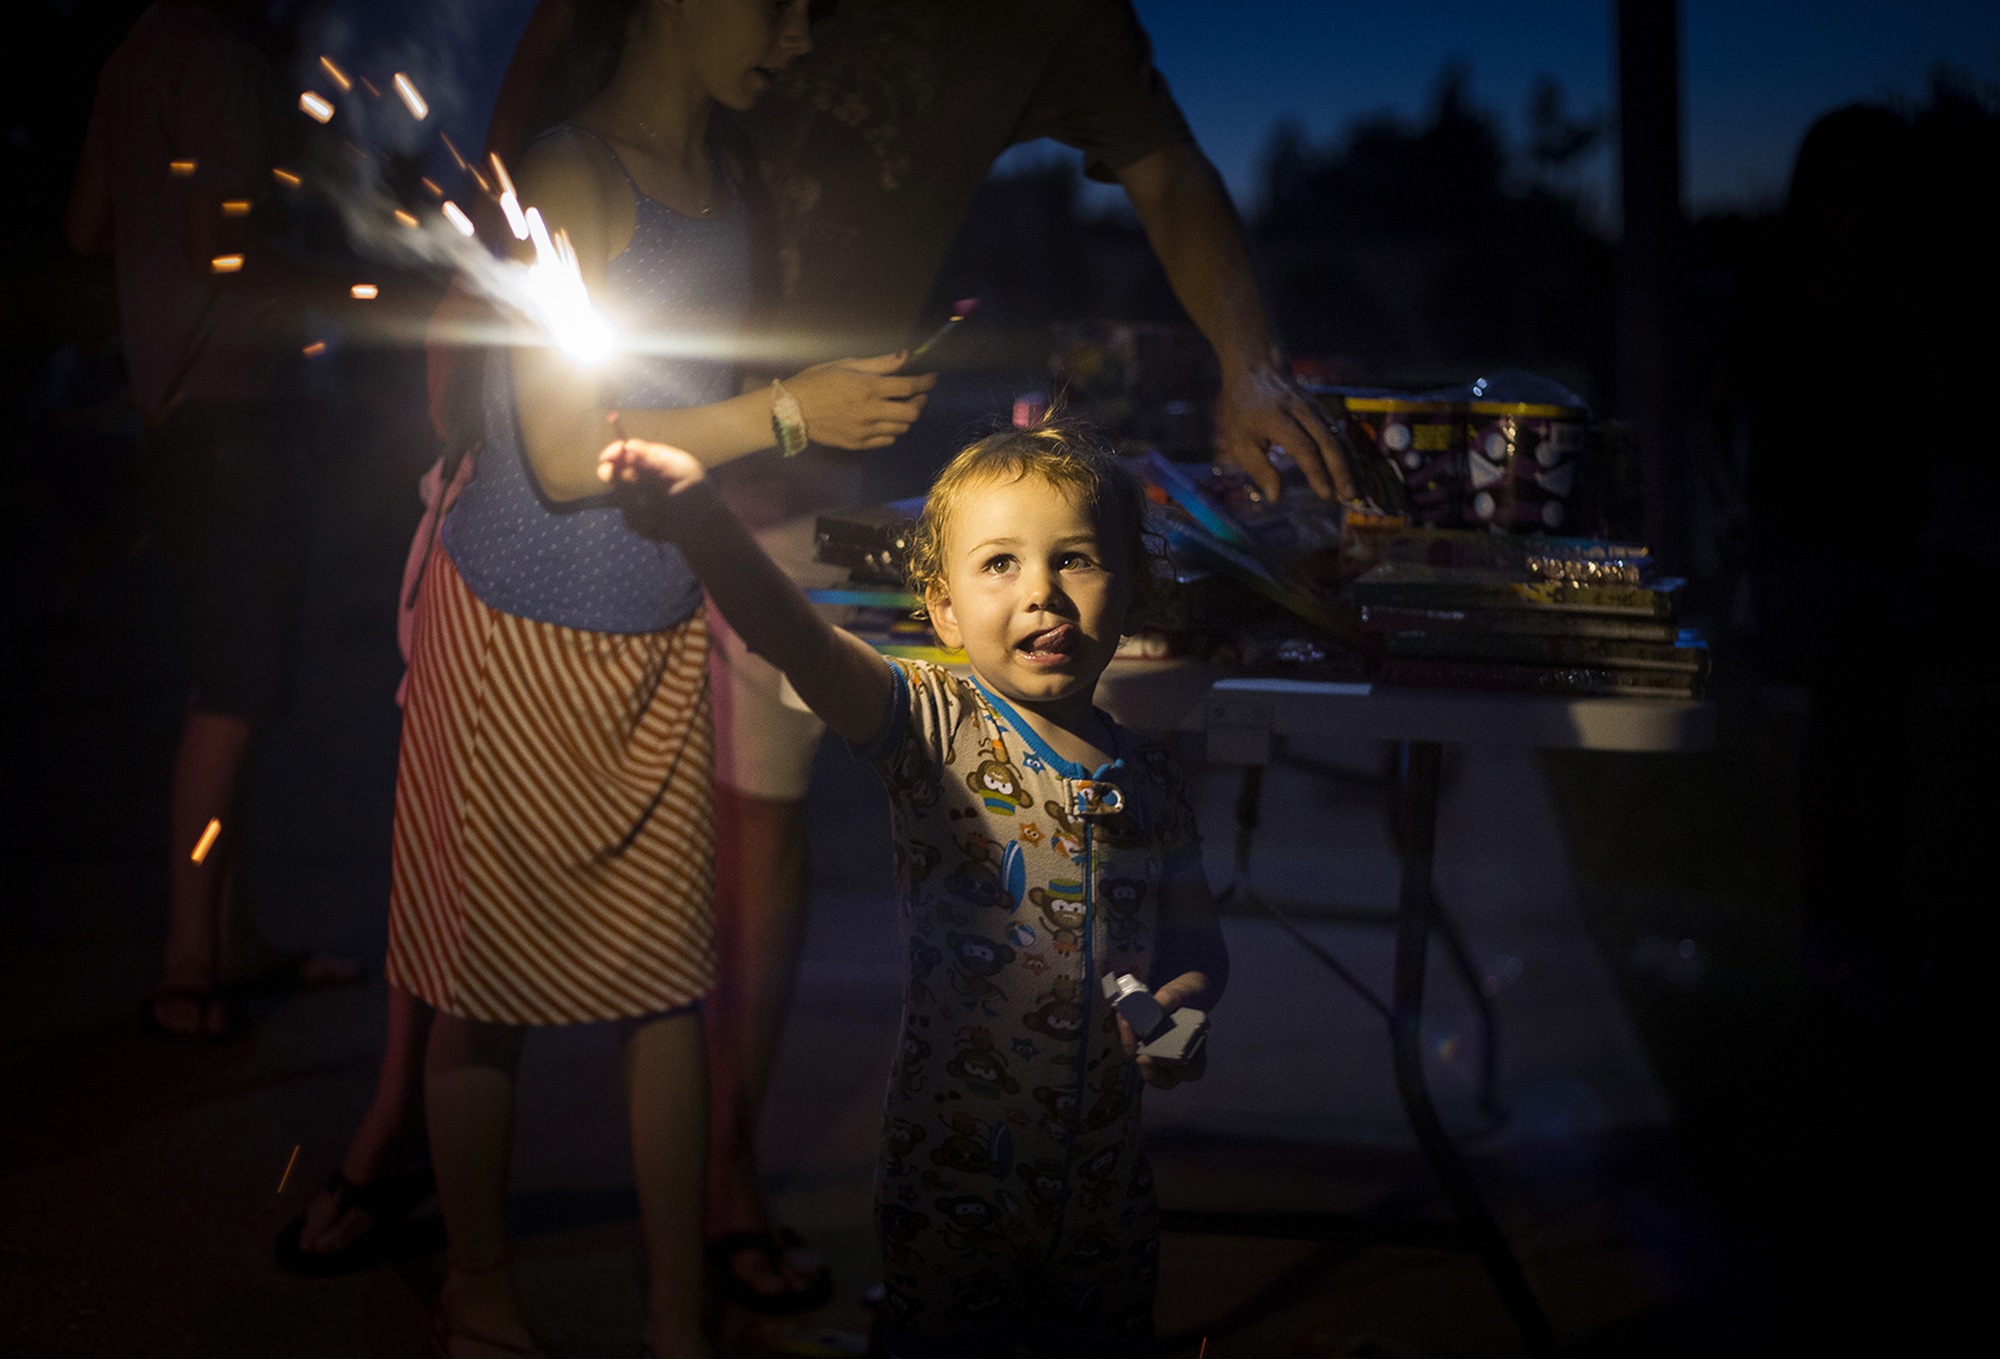  A boy experiences his first sparkler on the 4th of July.  